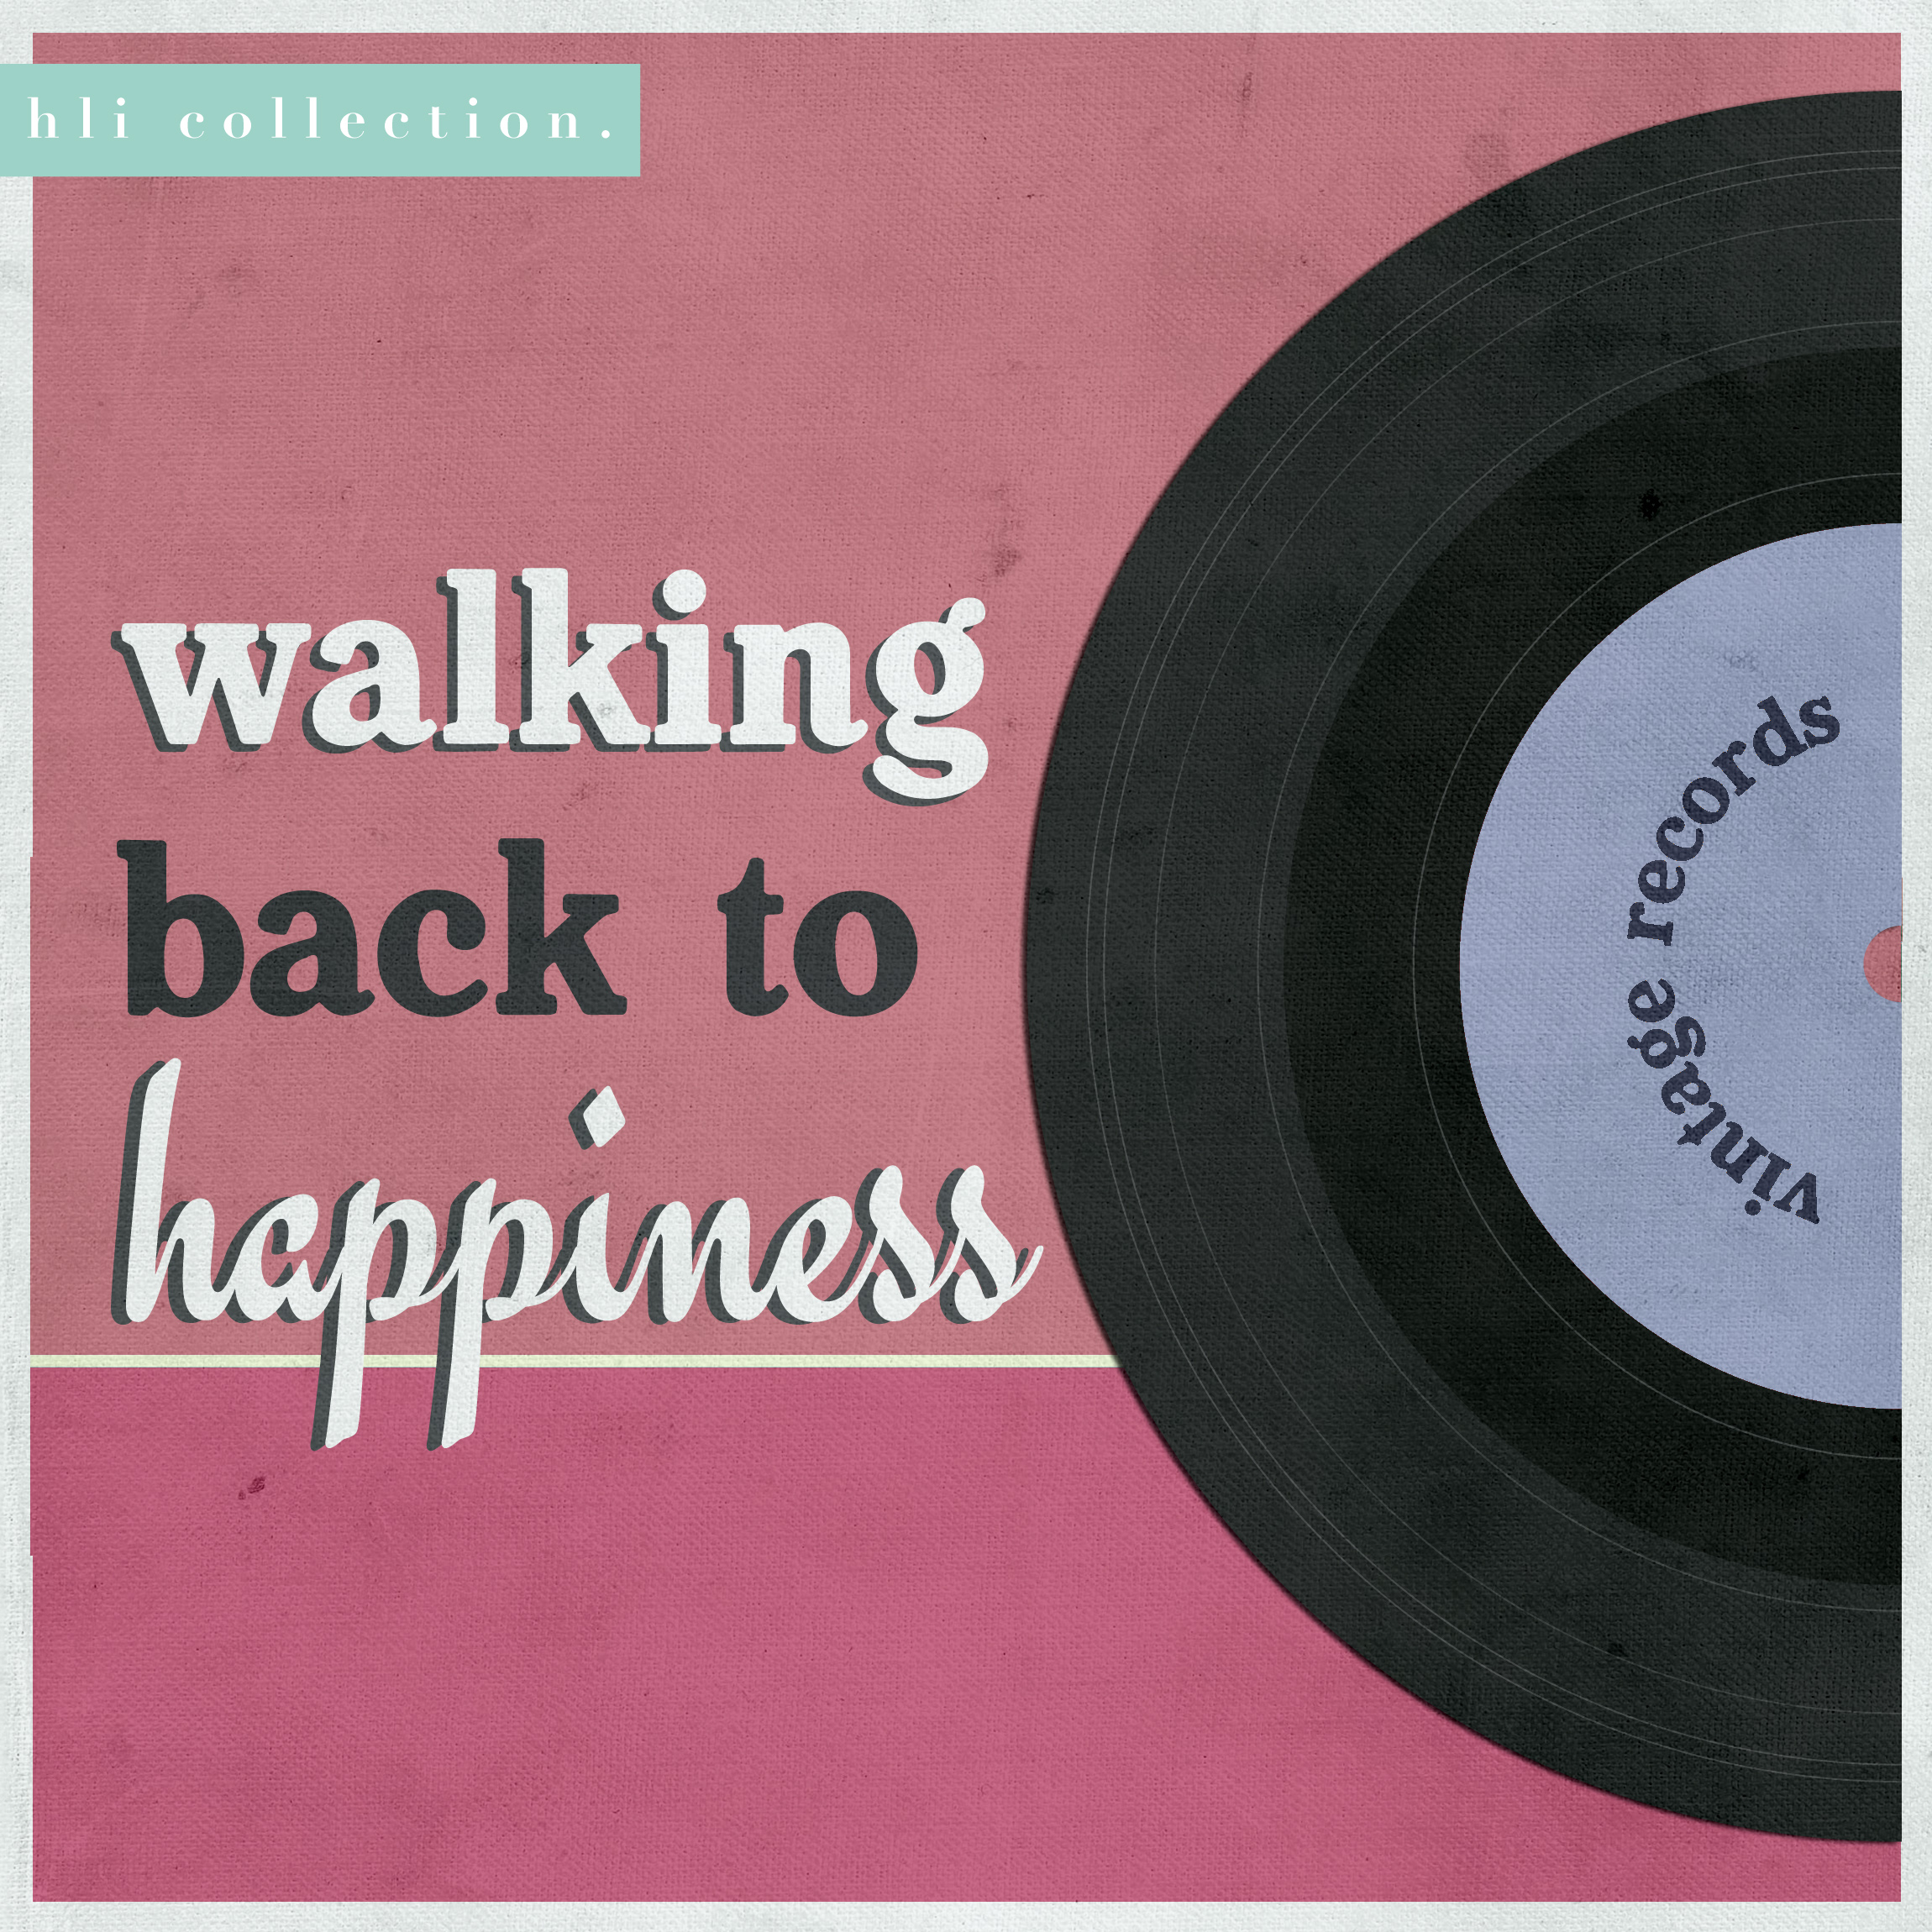 Walking-back-to-happiness_with-HLI-logo